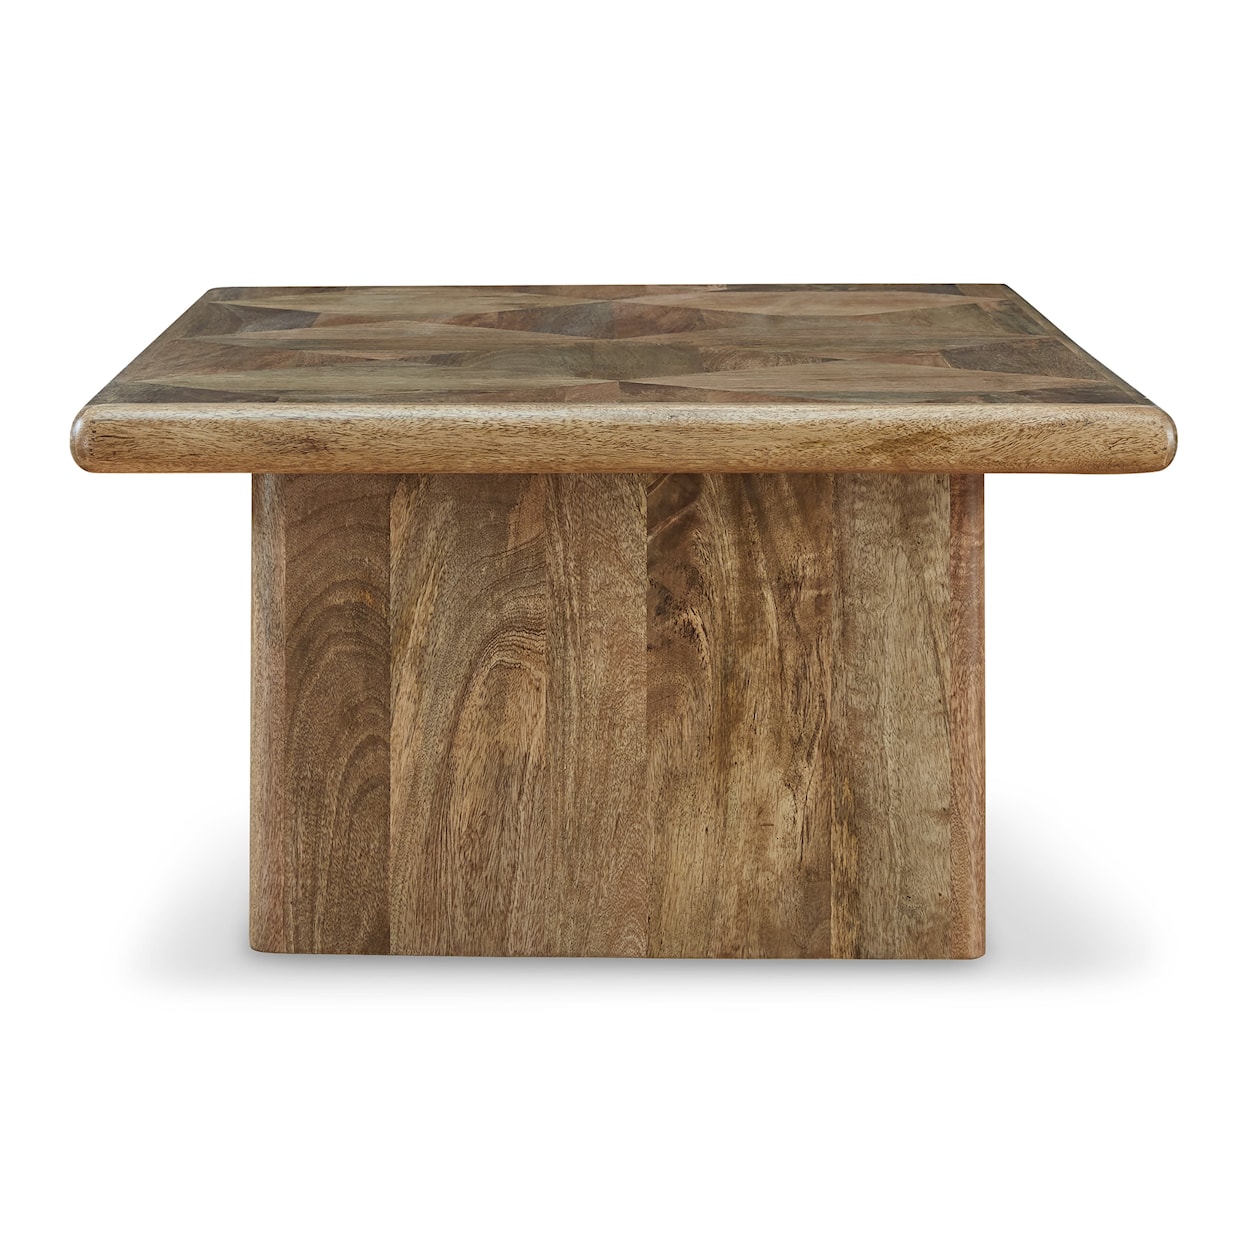 Signature Design by Ashley Lawland Coffee Table